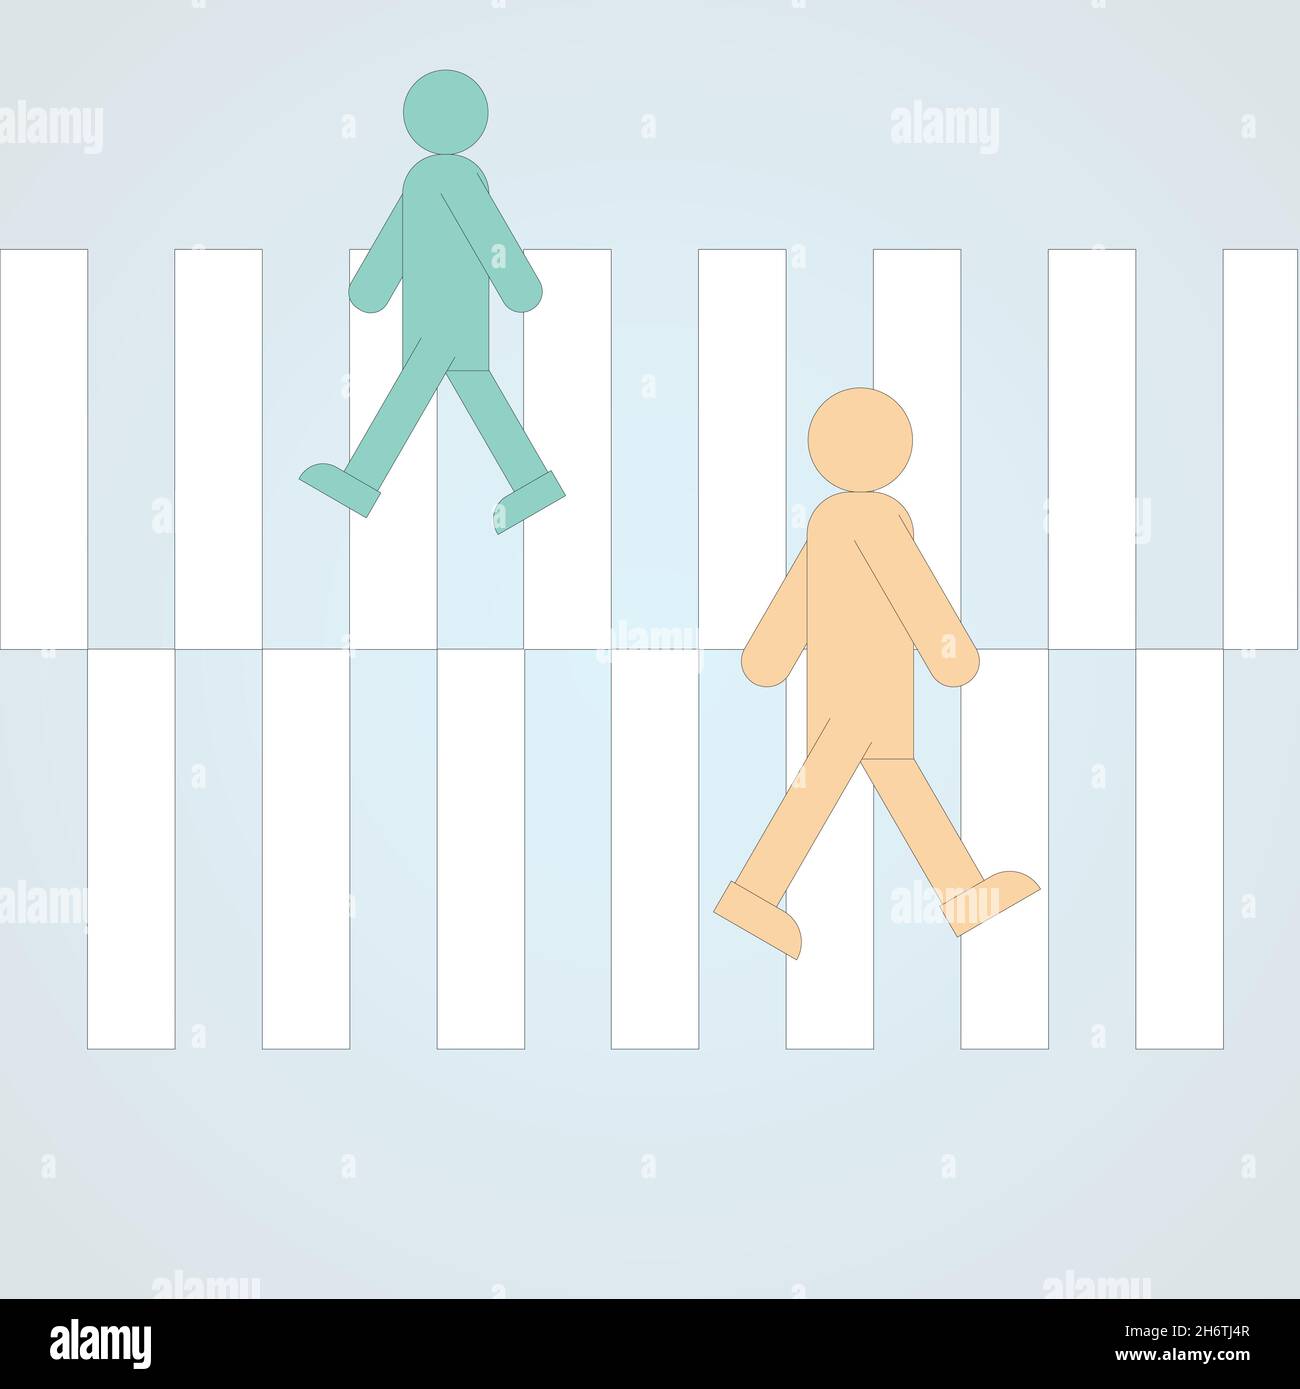 People crossing the crosswalk. It can be used to express traffic laws or to show daily scenery. Stock Vector